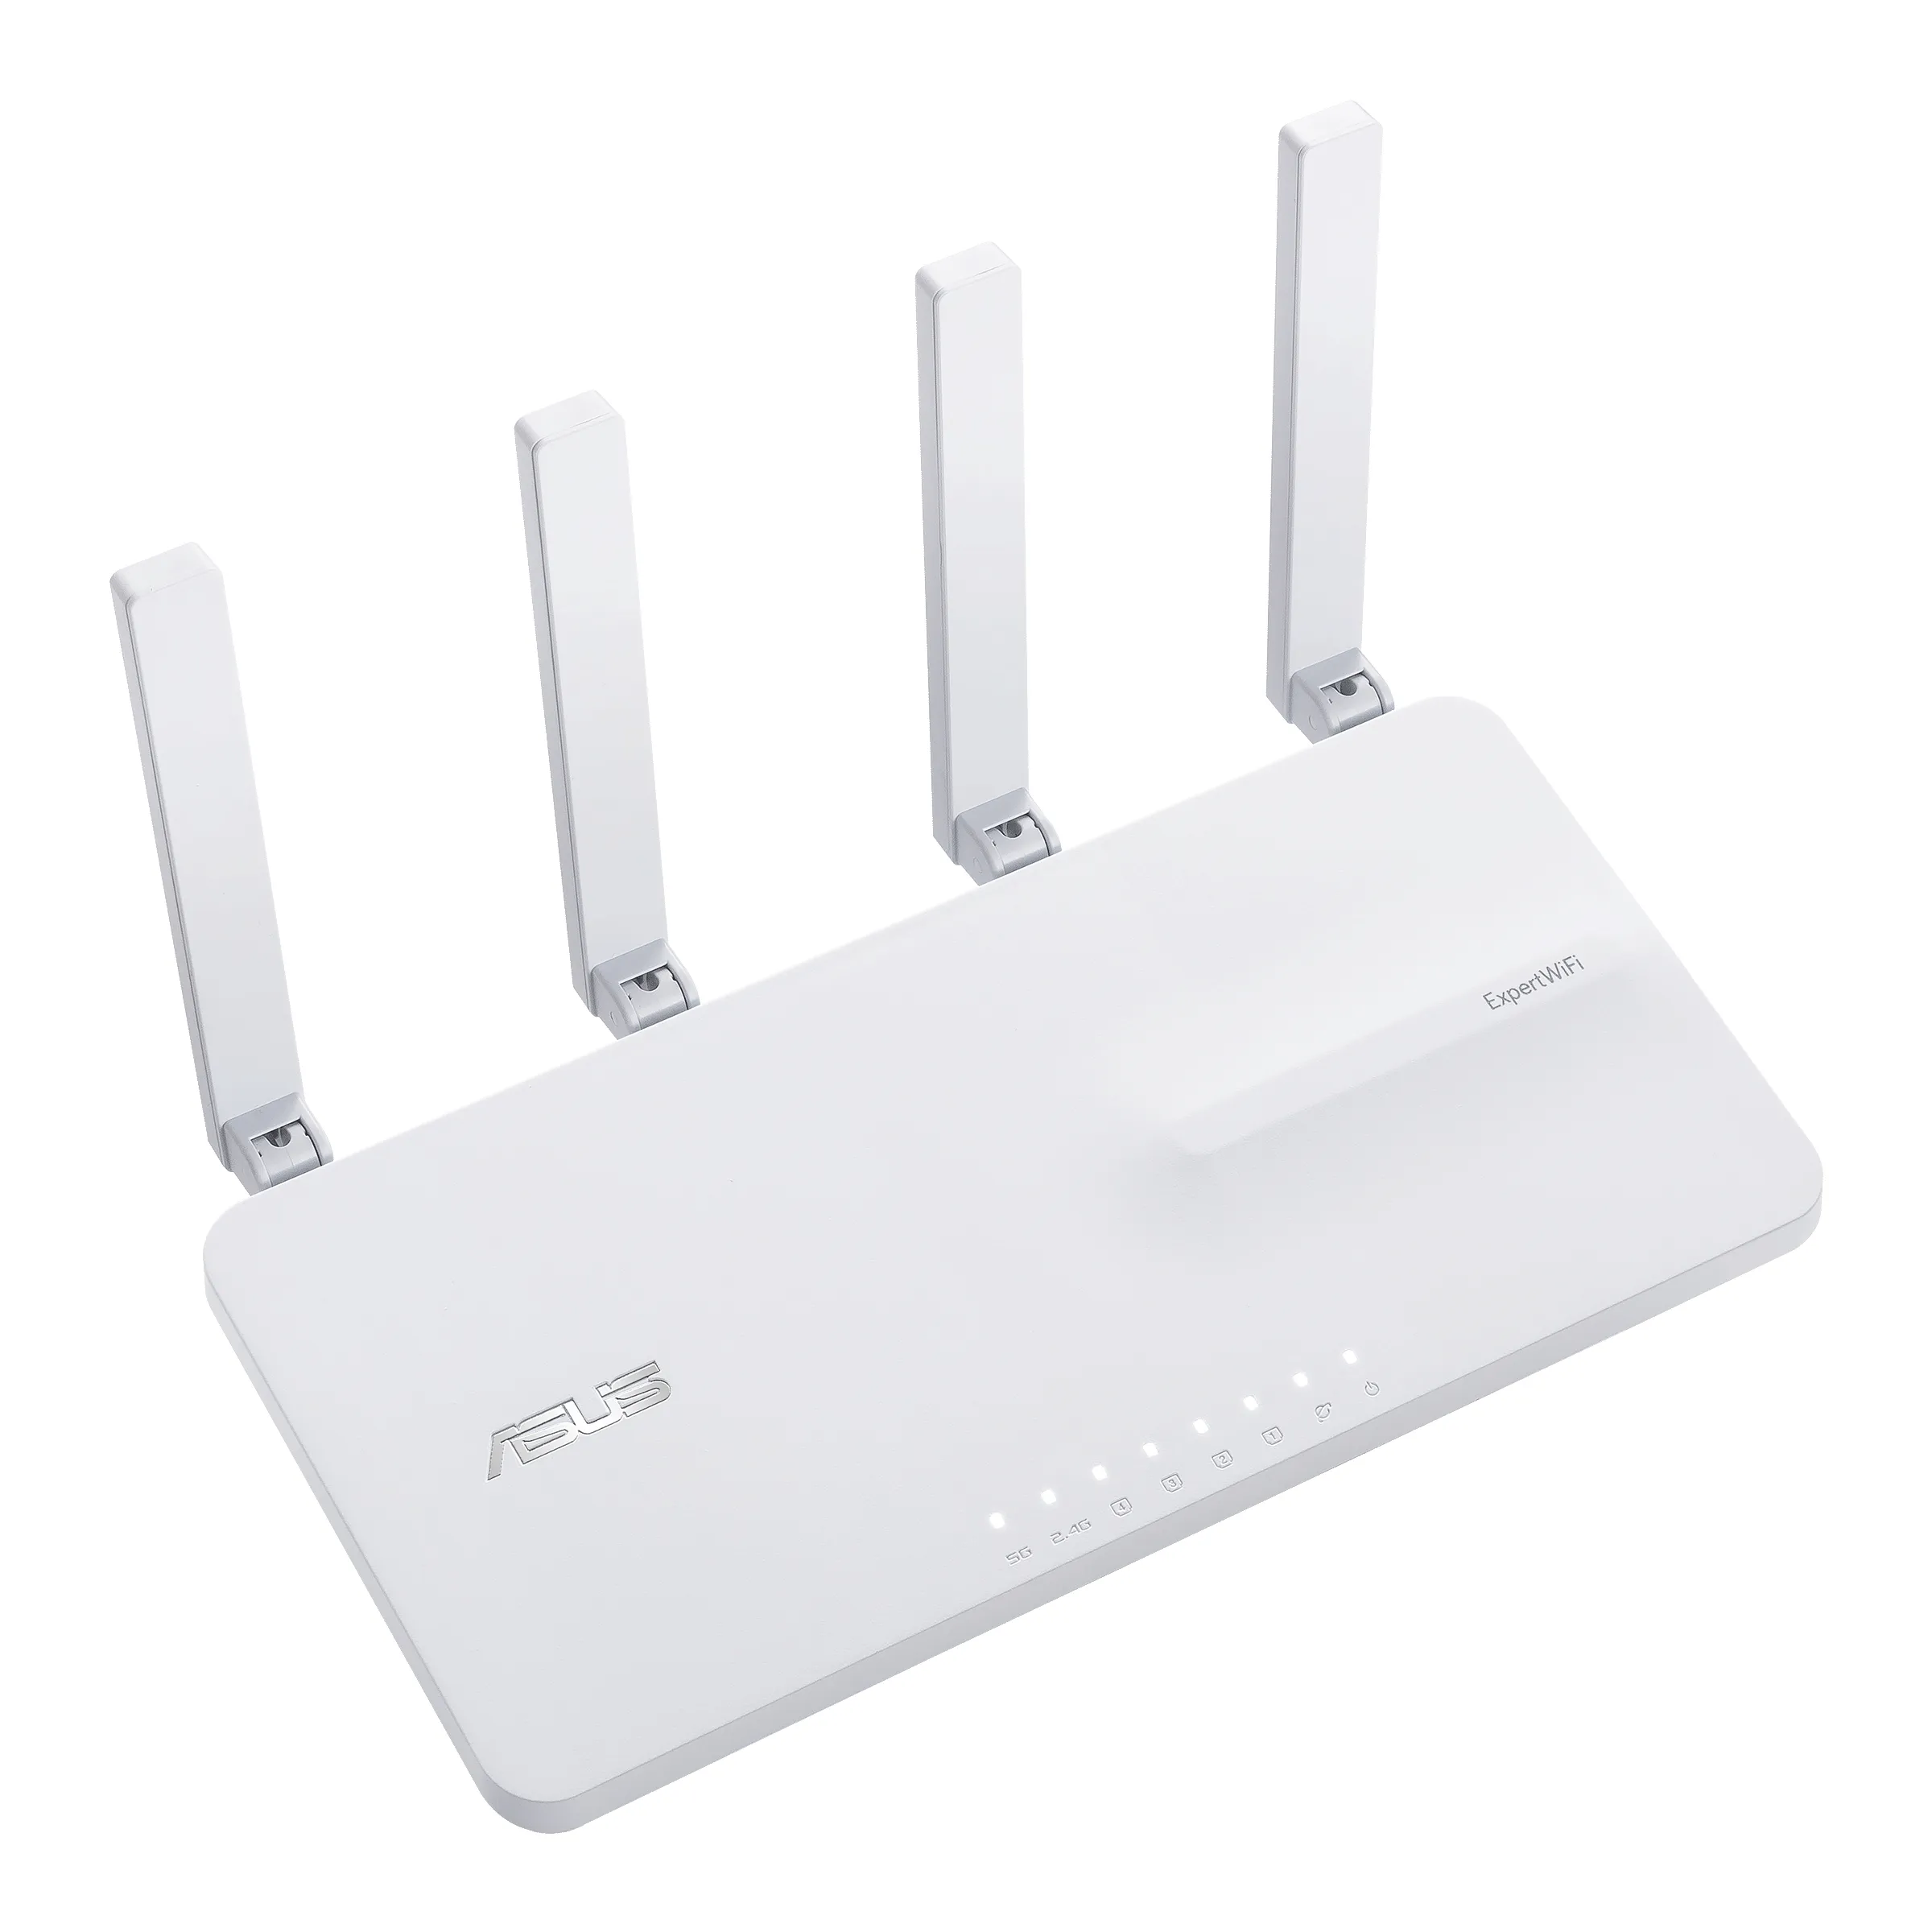 ASUS EBR63 – Expert WiFi router wireless Gigabit Ethernet Dual-band (2.4 GHz/5 GHz) Bianco